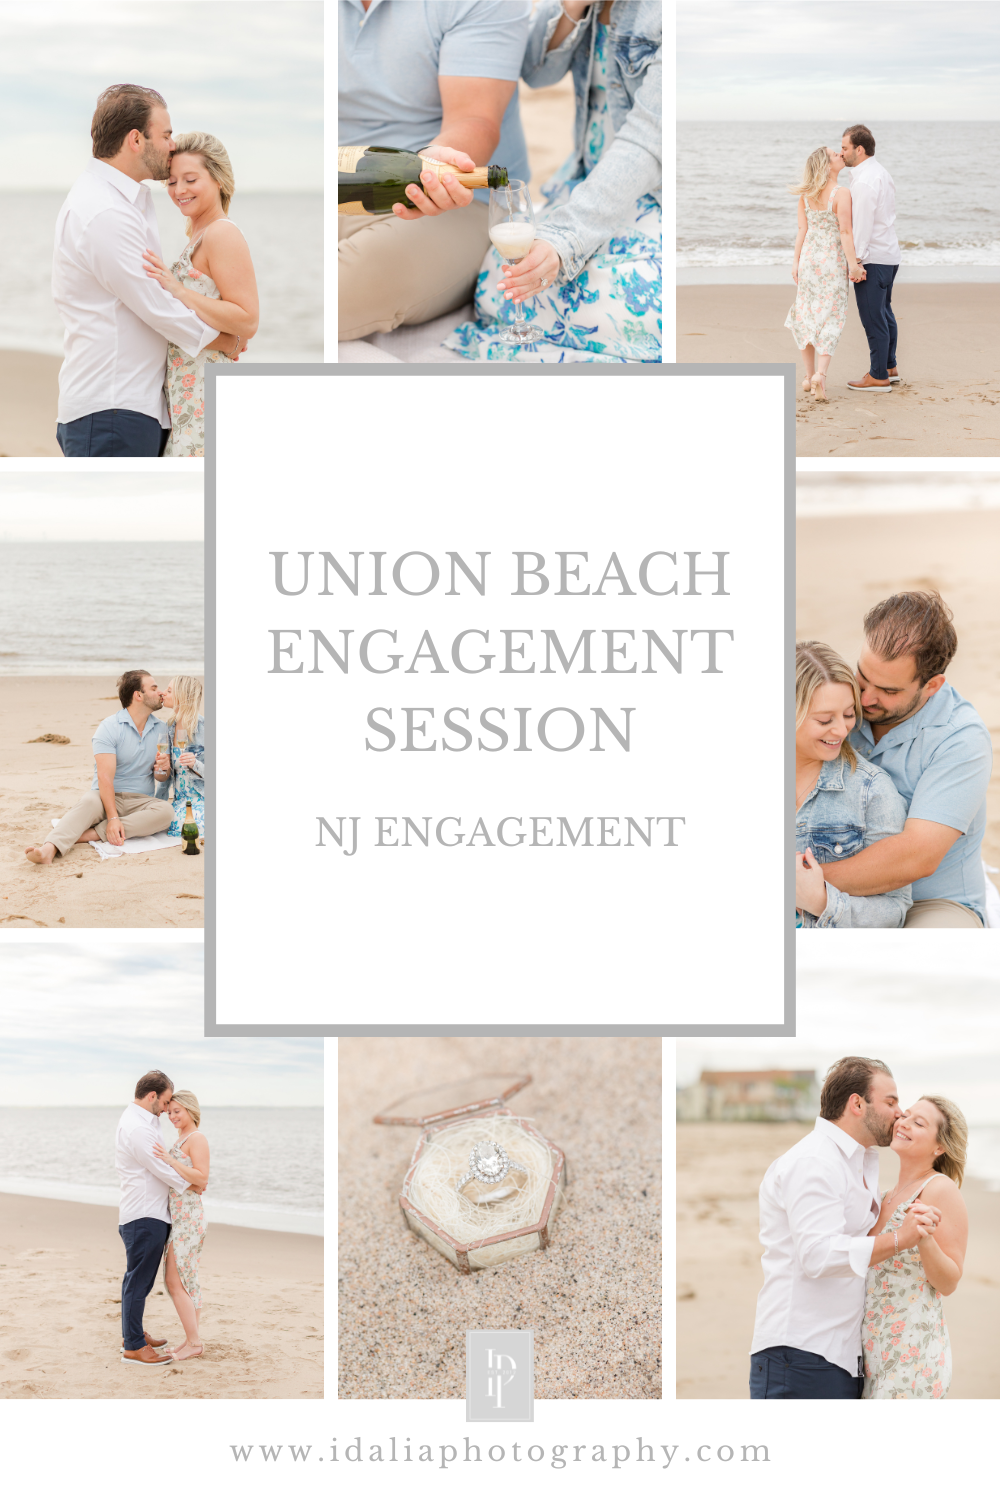 Union Beach engagement session on the beach for New Jersey couple with NJ wedding photographer Idalia Photography